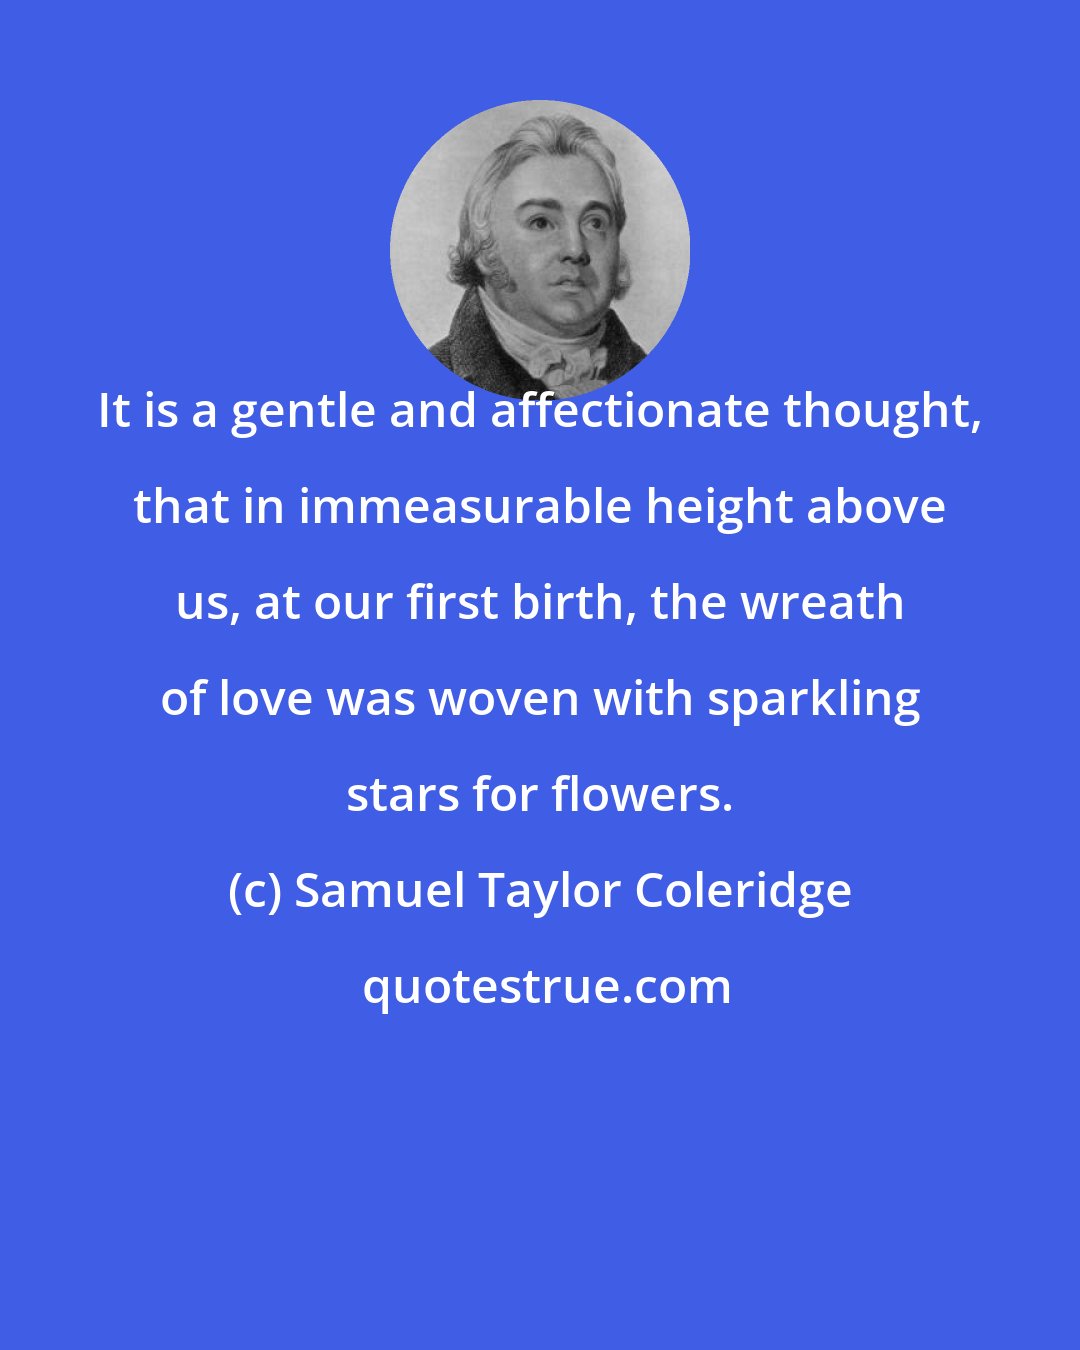 Samuel Taylor Coleridge: It is a gentle and affectionate thought, that in immeasurable height above us, at our first birth, the wreath of love was woven with sparkling stars for flowers.